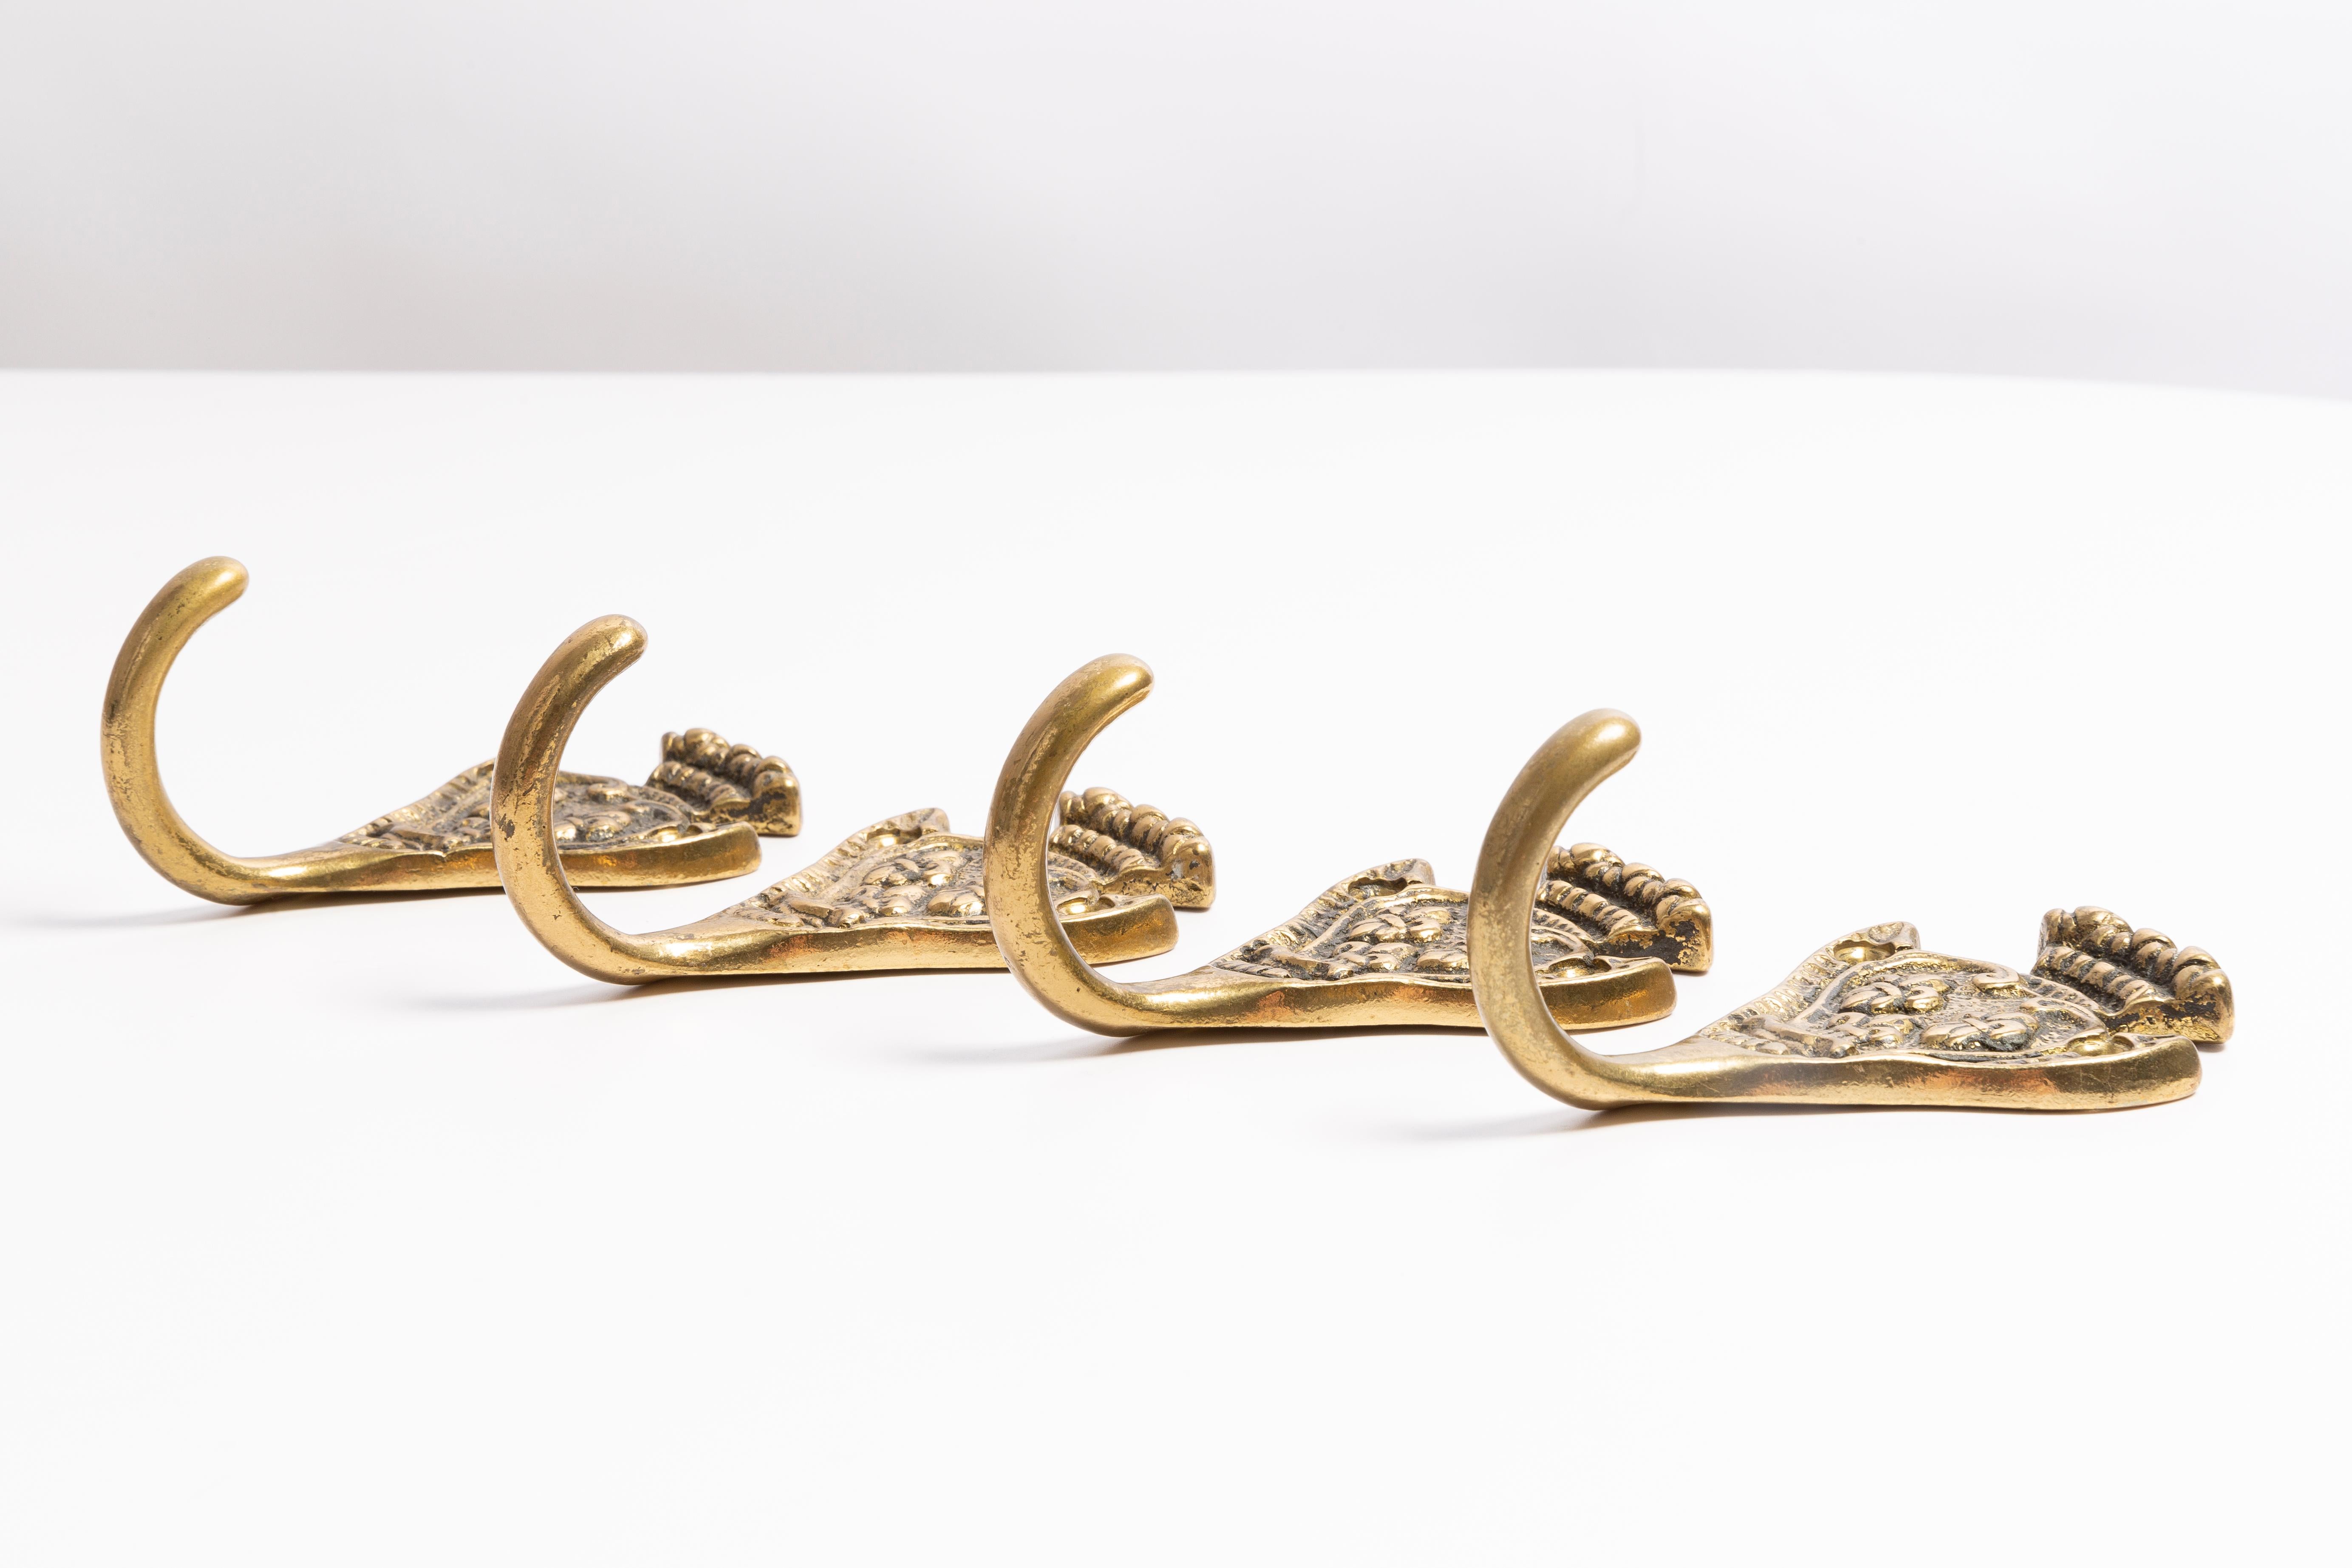 Set of Four Vintage Gold Decorative Wall Hangers, Europe, 1960s For Sale 2